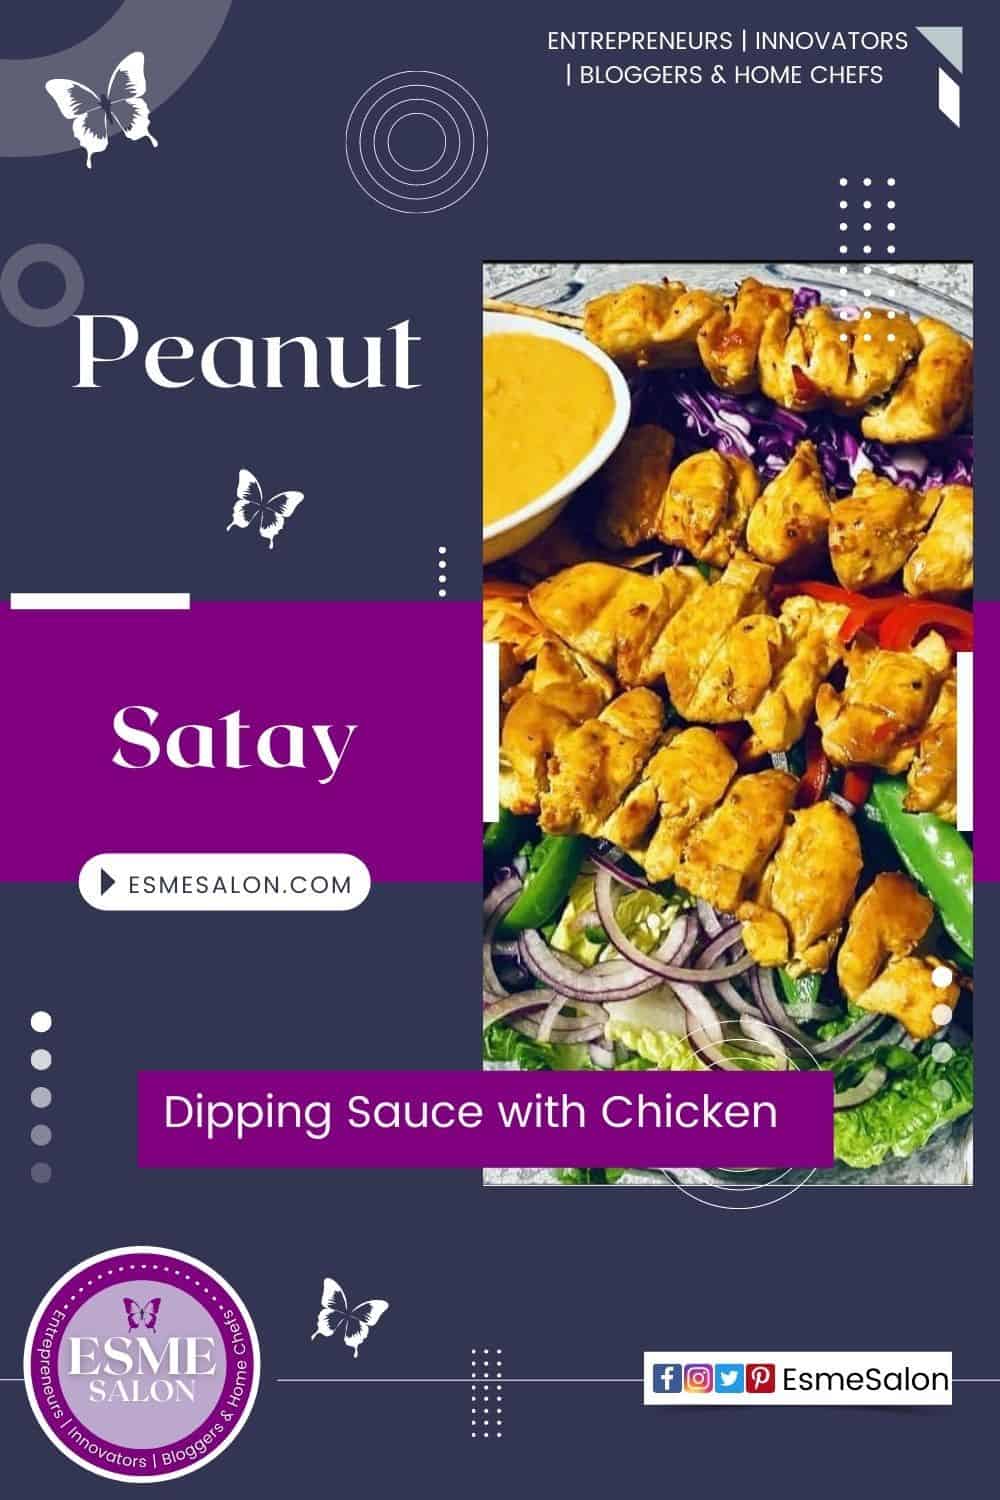 A platter with Peanut Satay dipping sauce on Chicken pieces